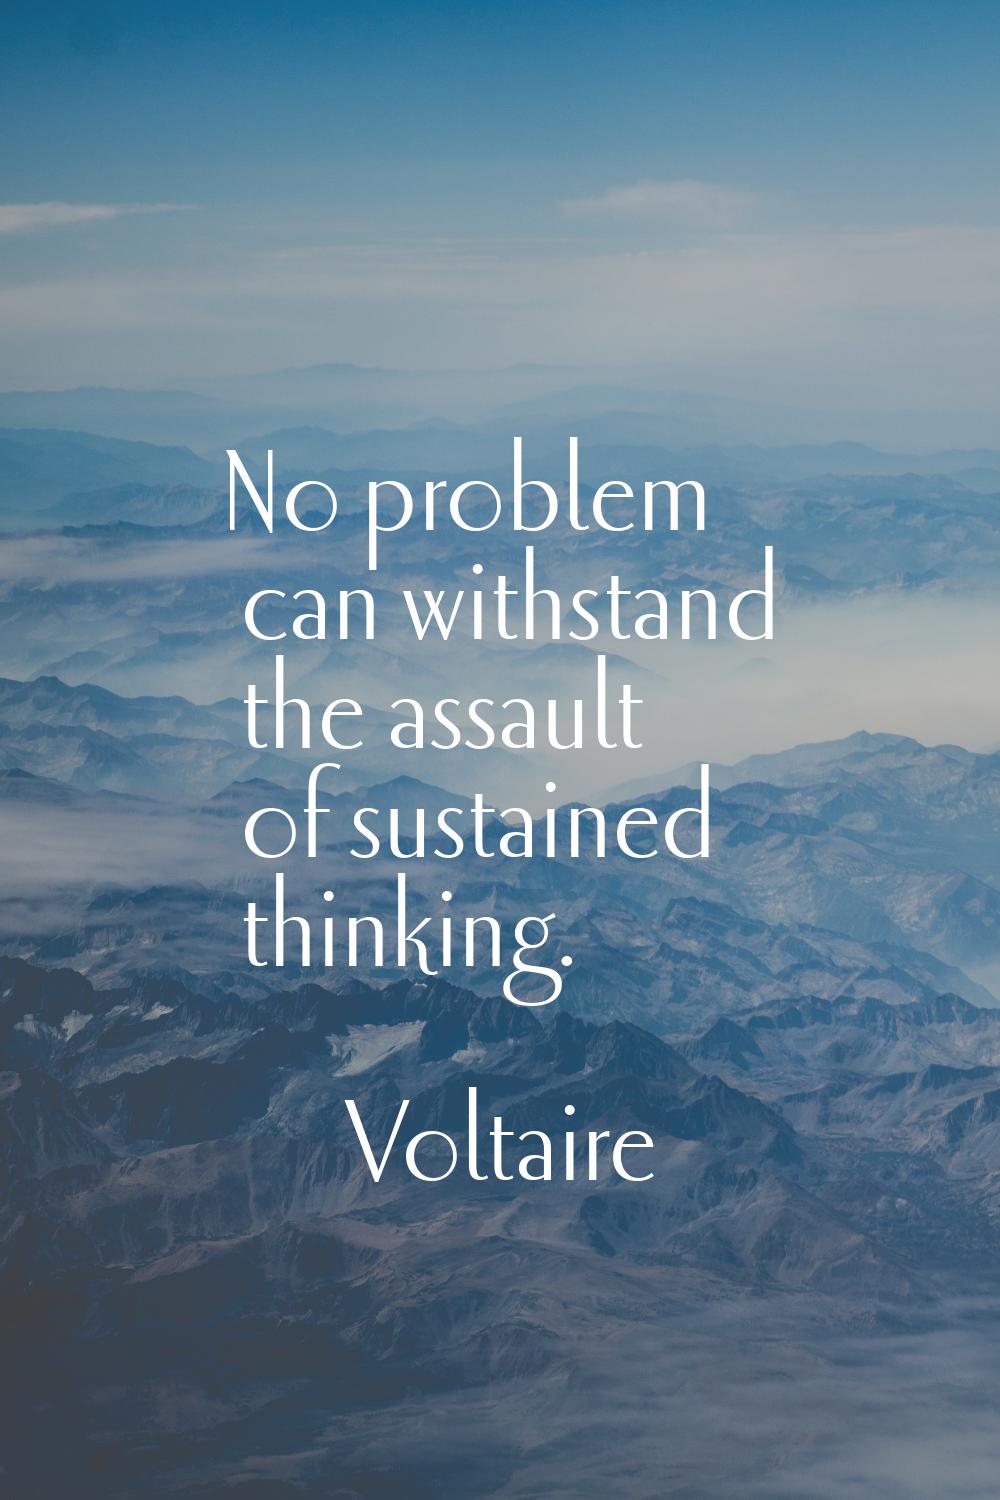 No problem can withstand the assault of sustained thinking.